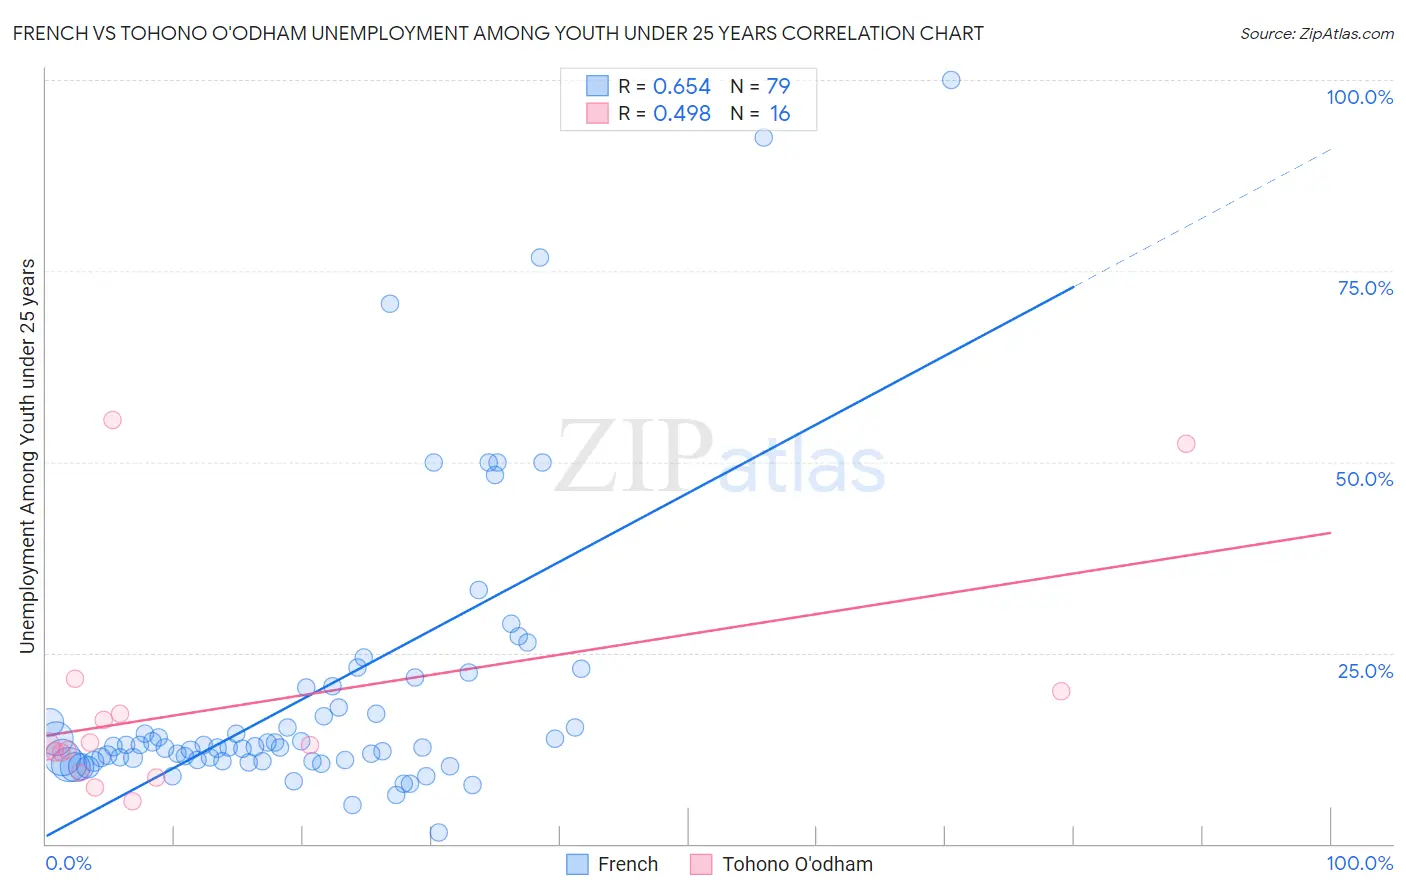 French vs Tohono O'odham Unemployment Among Youth under 25 years